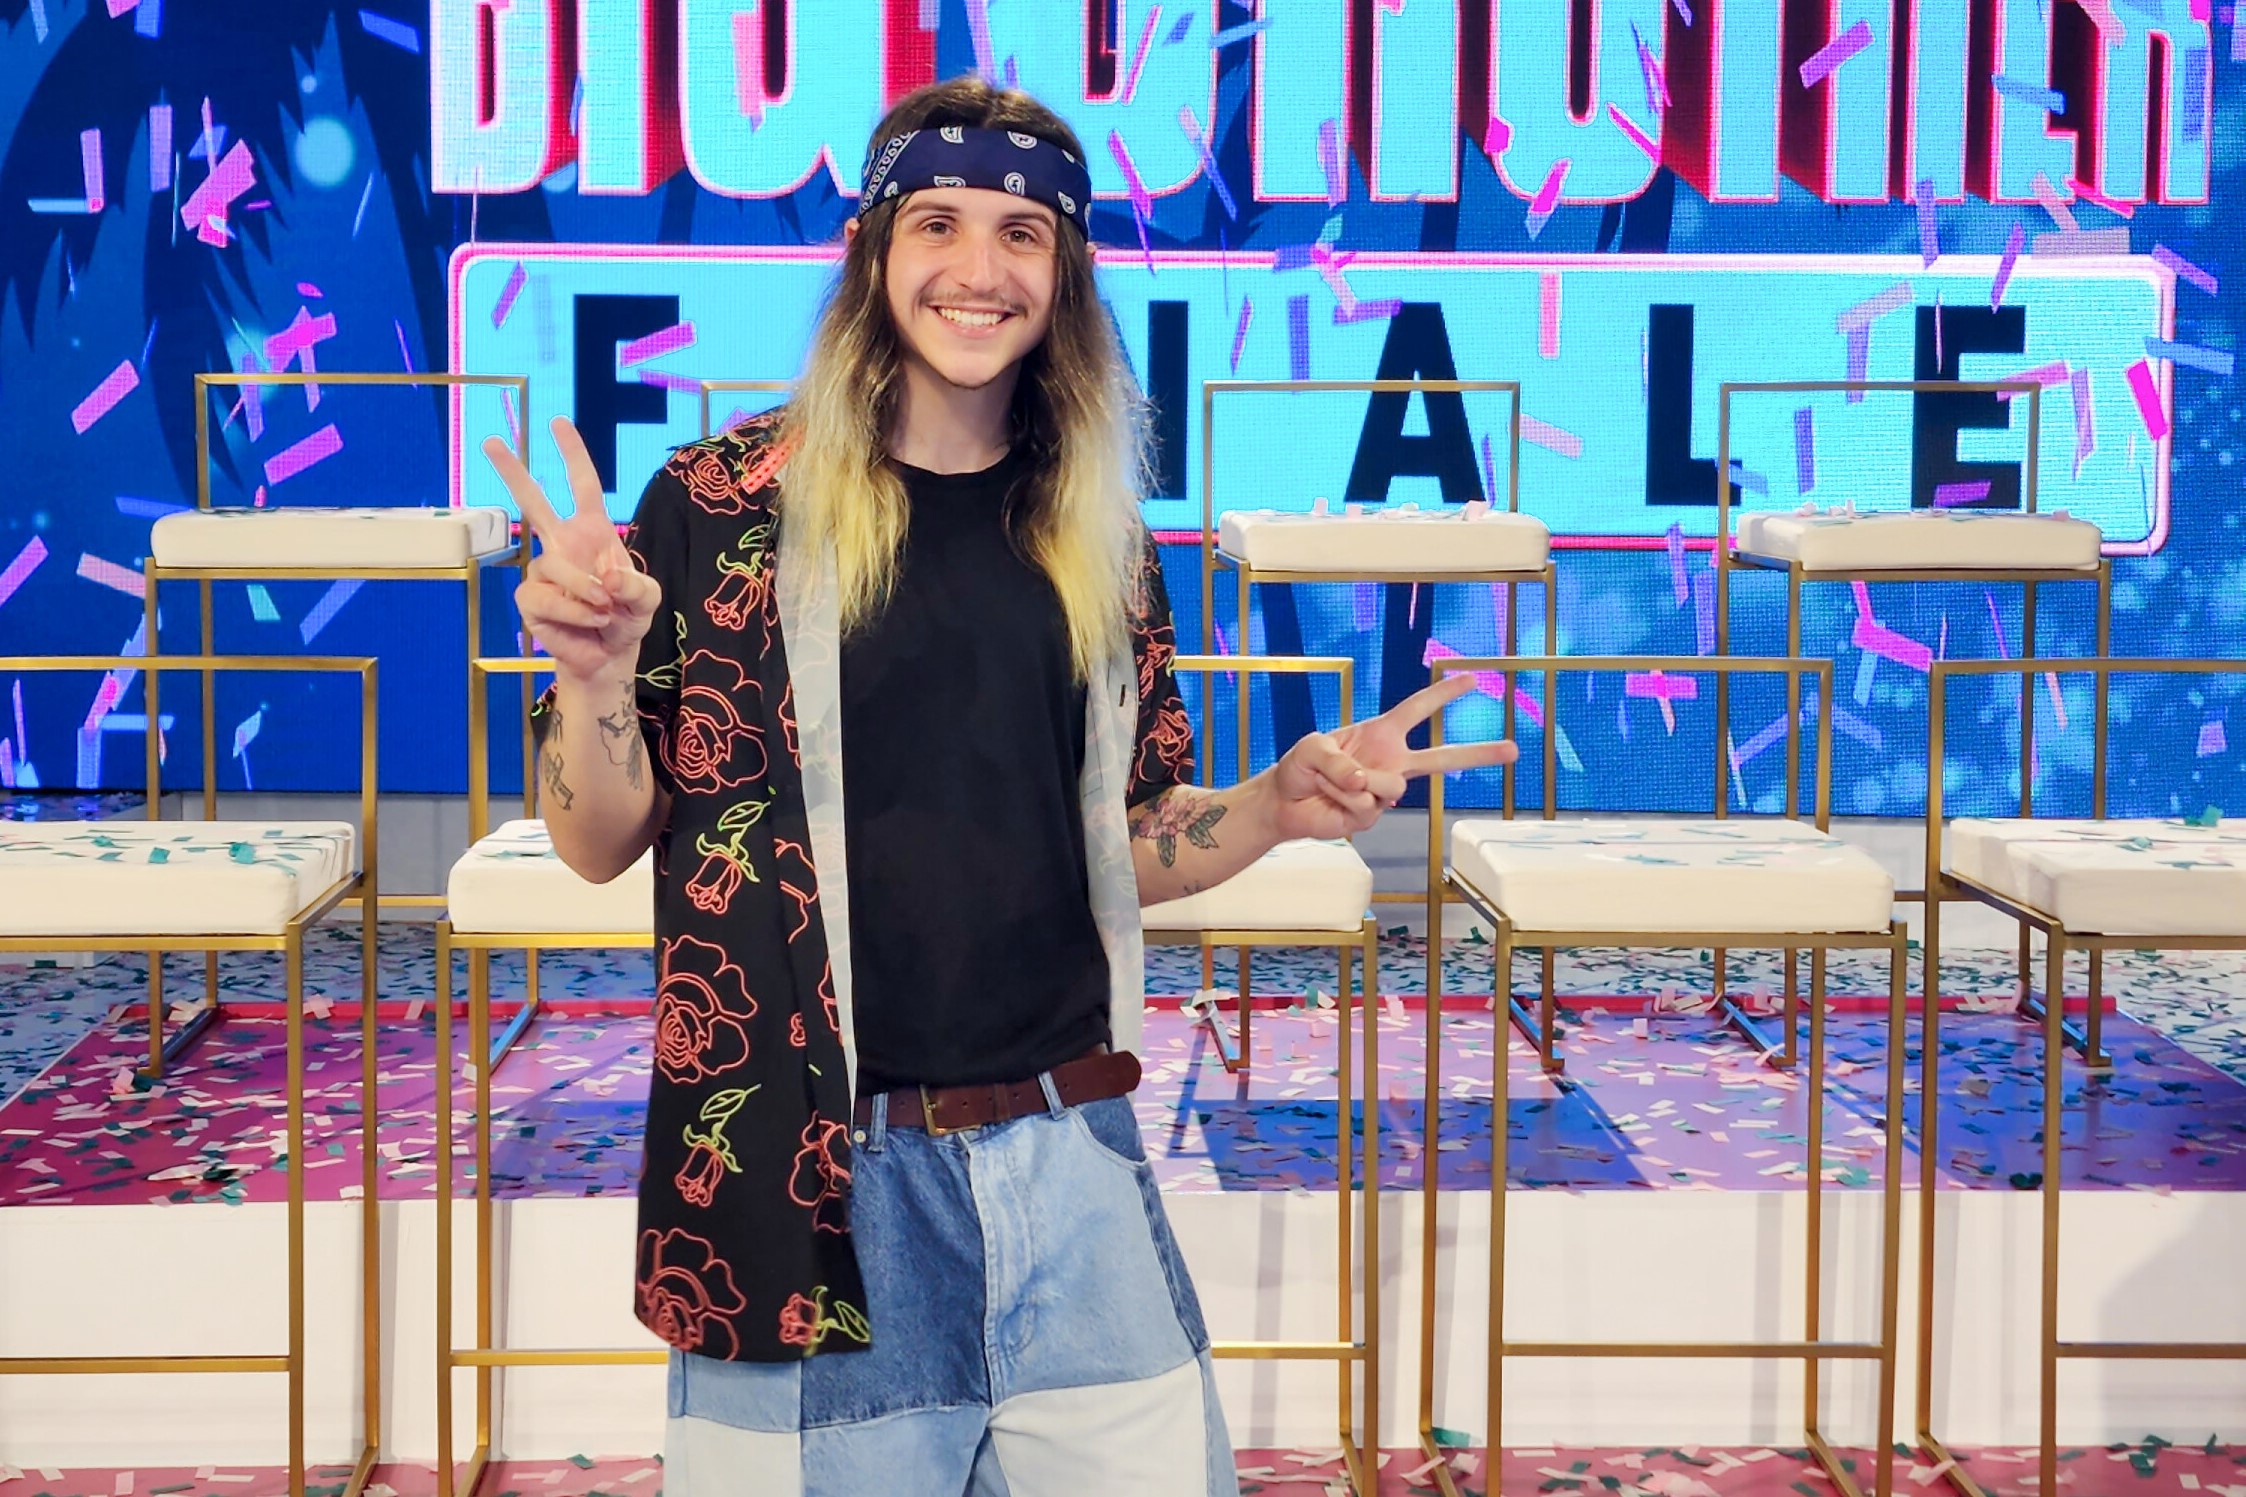 Matthew Turner, who came in third place in 'Big Brother 24' on CBS, wears a black button-up shirt with neon red and yellow roses on it over a black shirt and jeans.